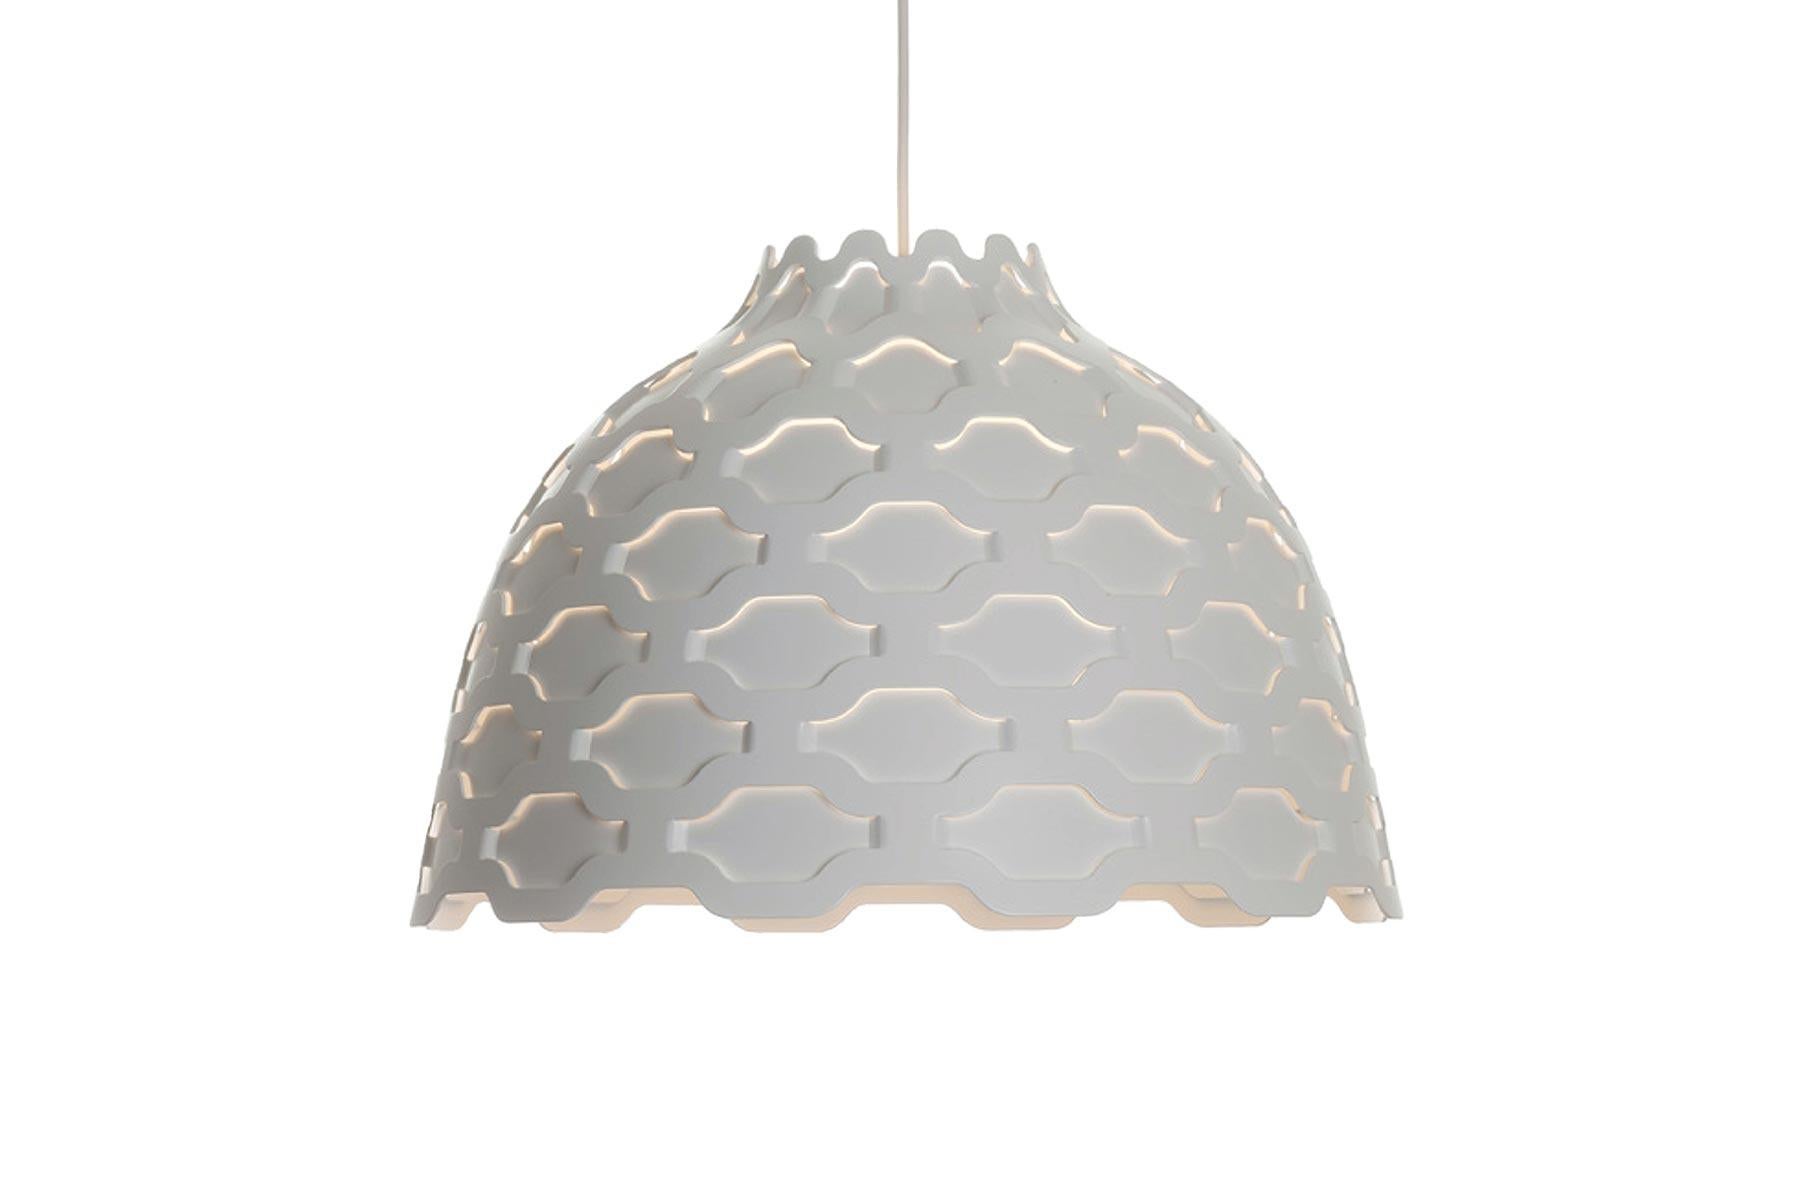 The concentrated light from the light source is filtered through an opalescent diffuser to ensure soft, comfortable light distribution. The softened light creates a pleasant atmosphere within the shade and ensures a gentle lighting effect on the